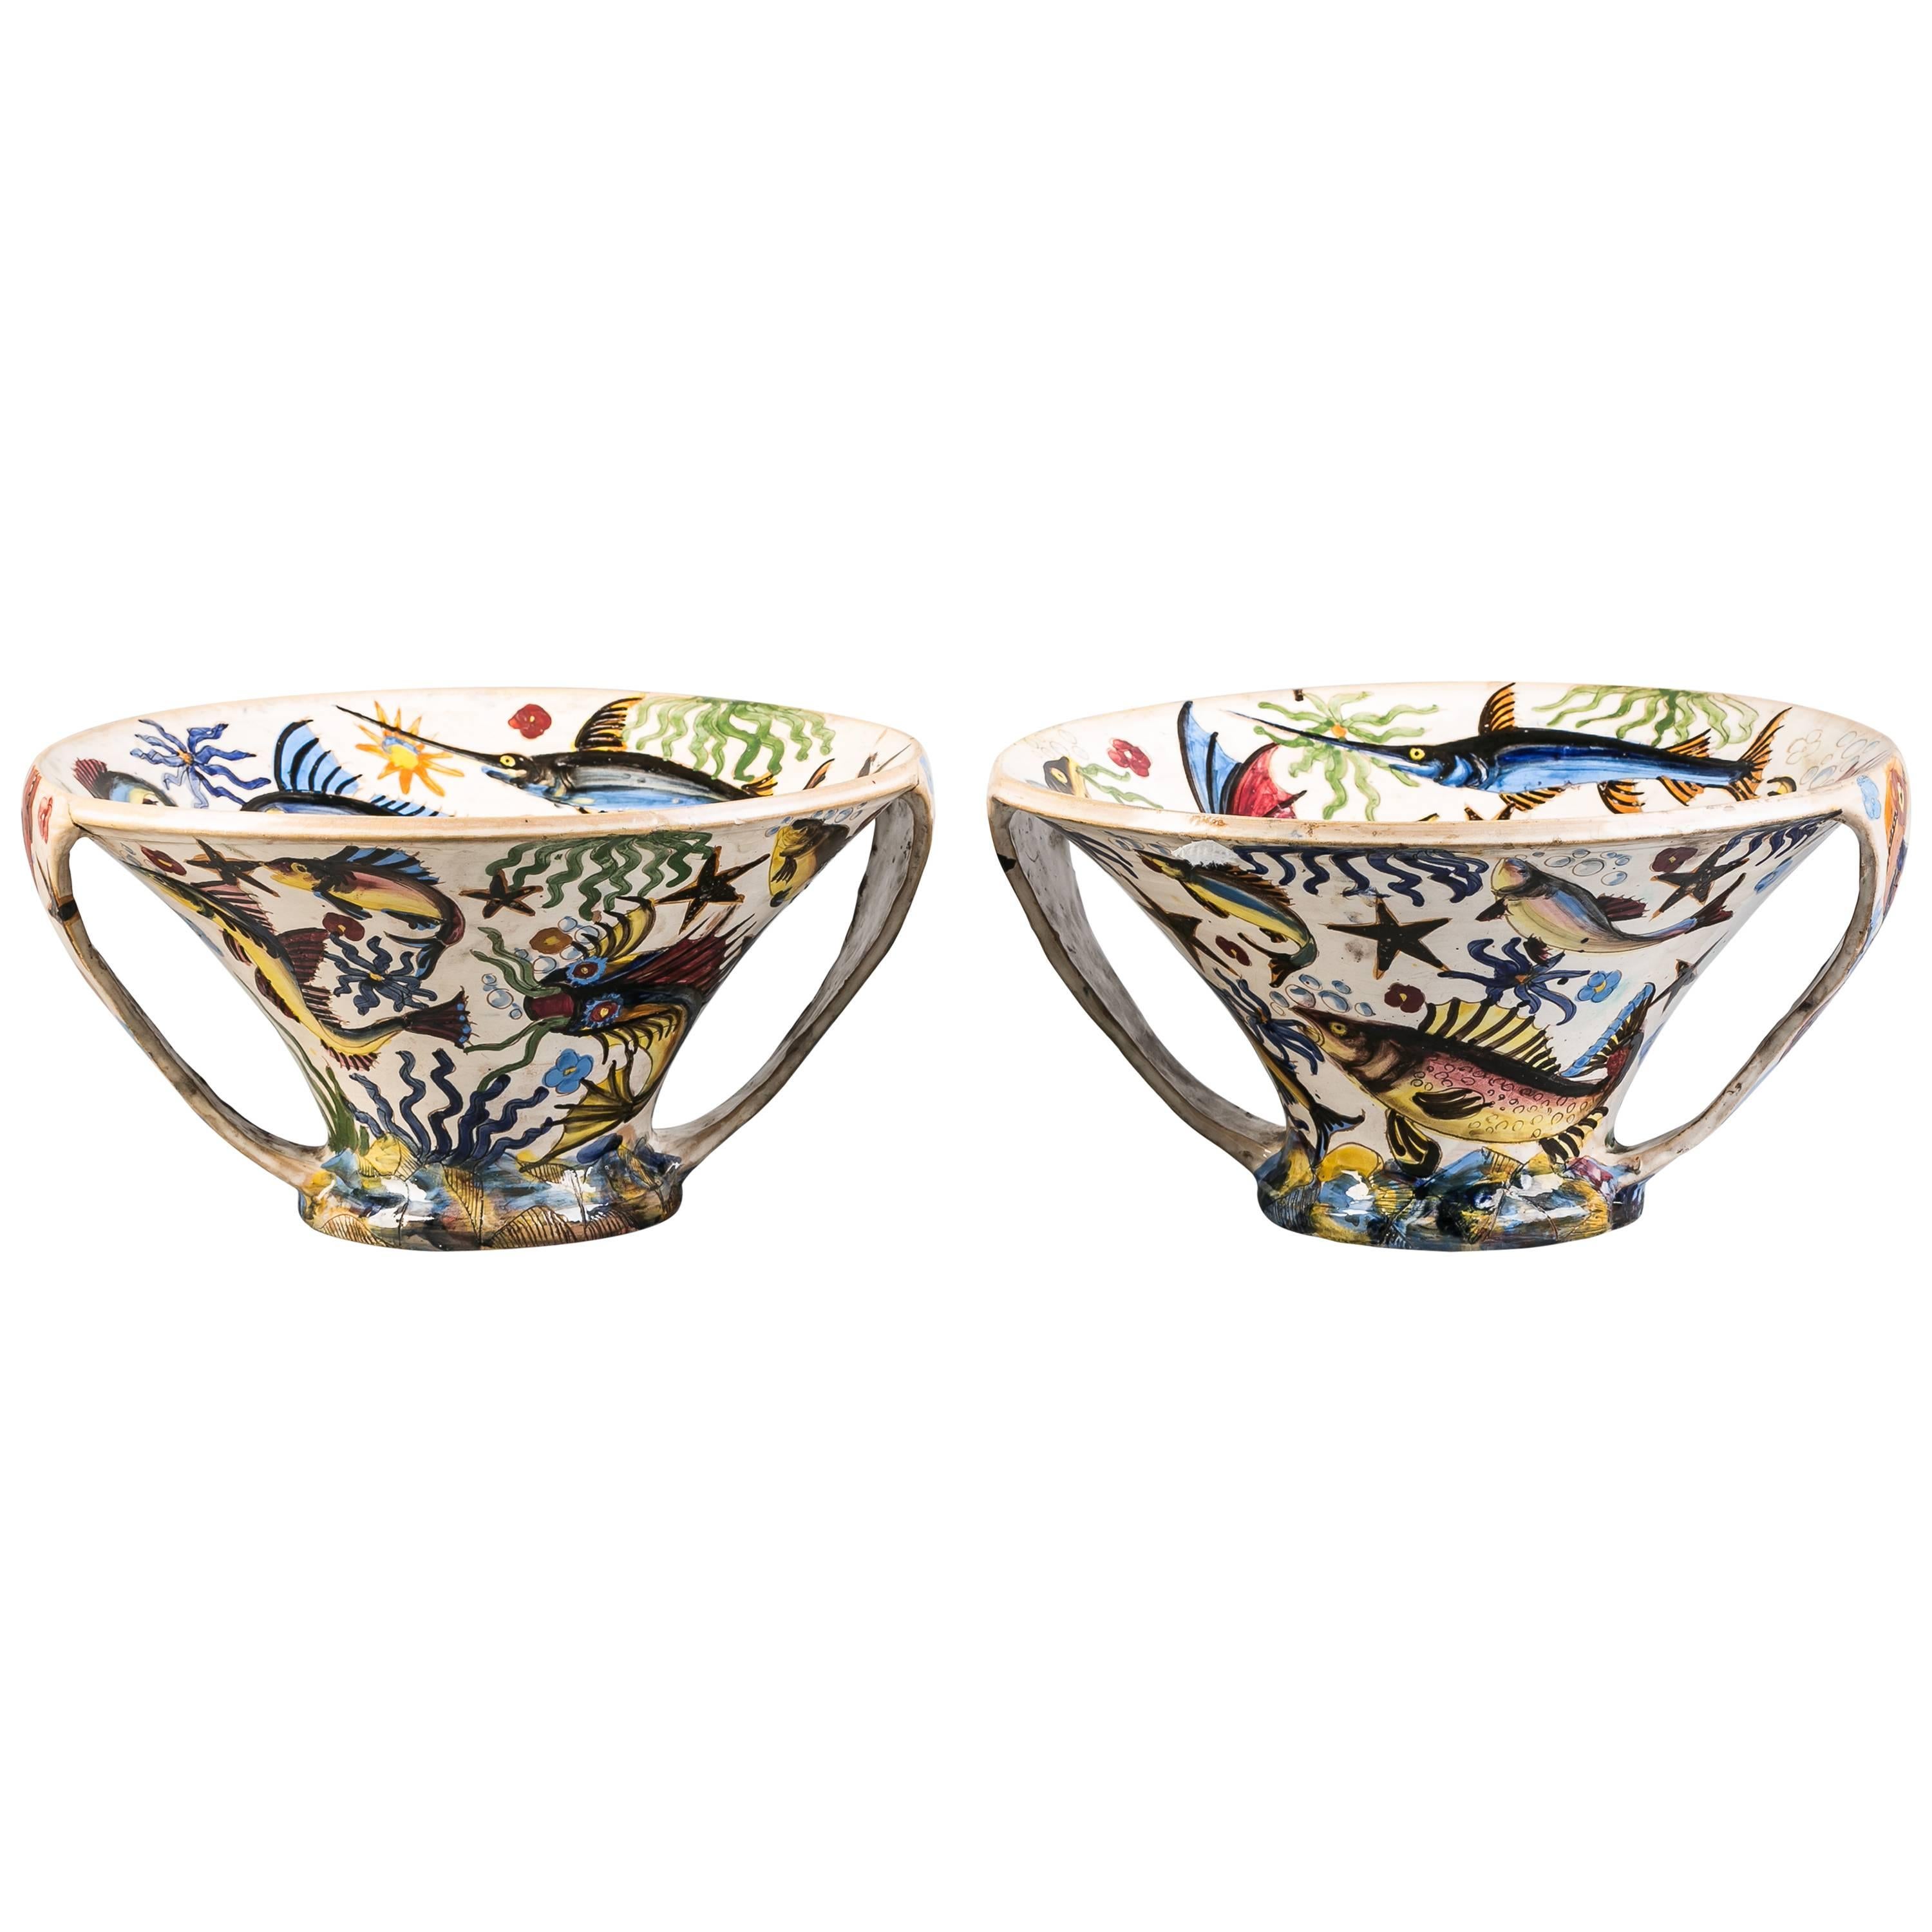 Pair of Italian Ceramic Two-Handled Conical Centrepiece Bowls, circa 1900